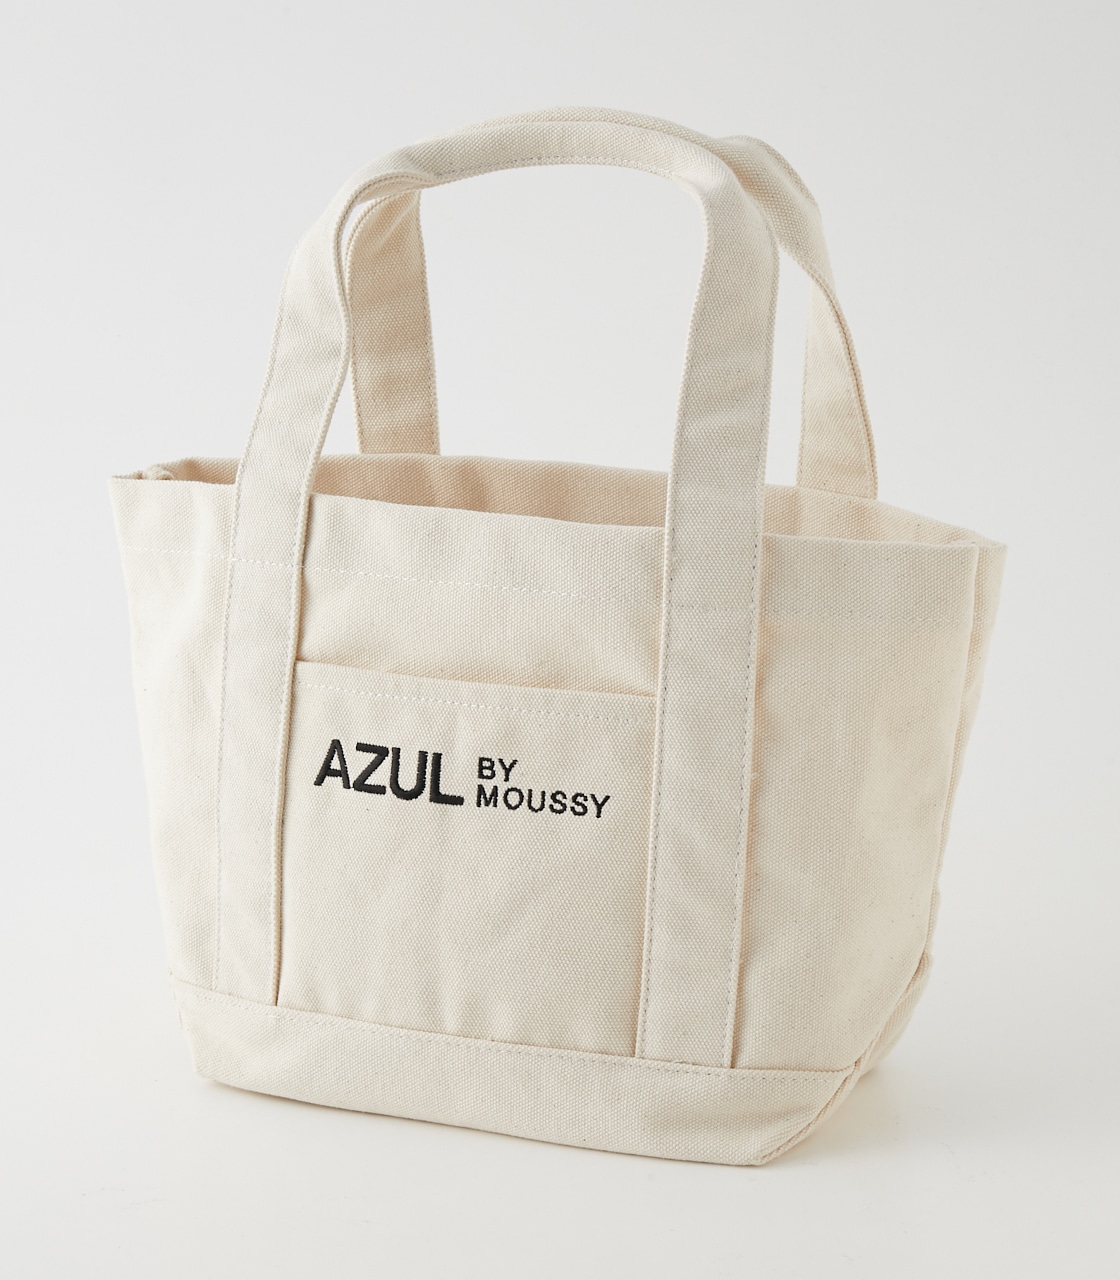 Azul Canvas Tote Bag Azulキャンバストートバッグ Azul By Moussy アズールバイマウジー 公式通販サイト